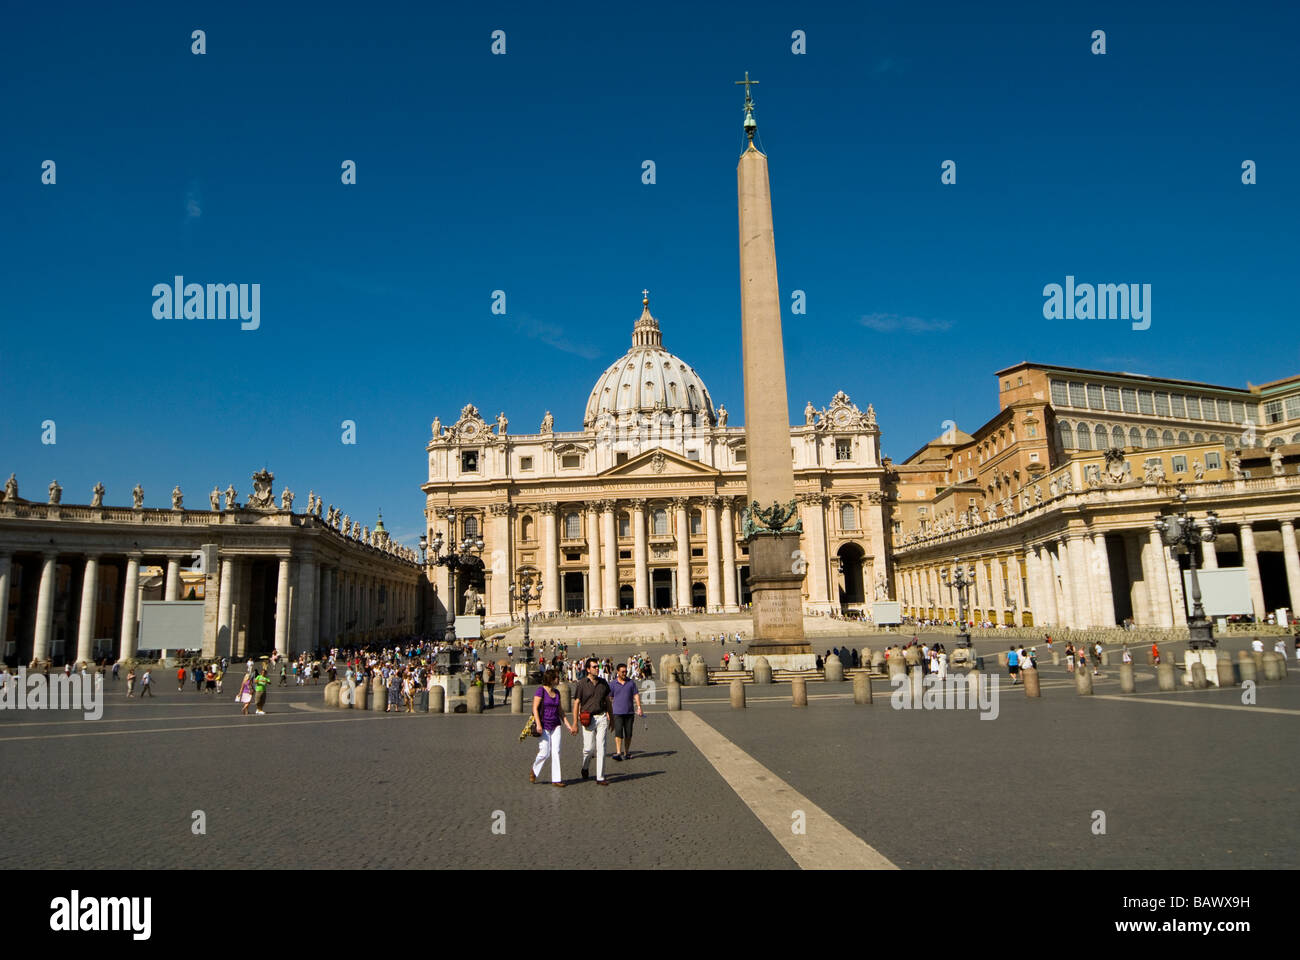 St. Peter's Square and Basilica Stock Photo